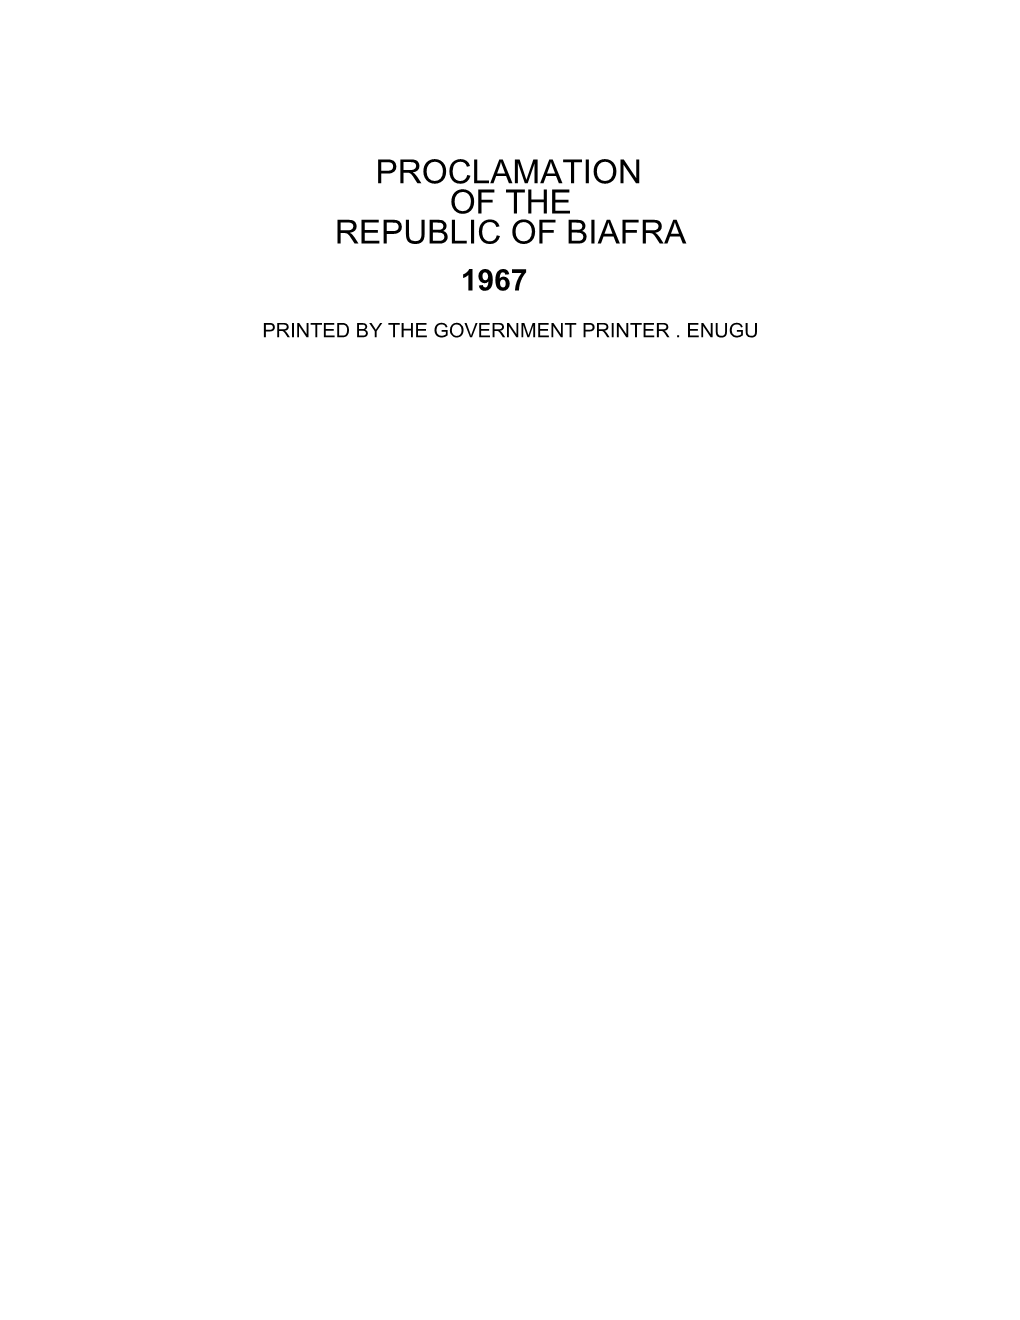 Proclamation of the Republic of Biafra